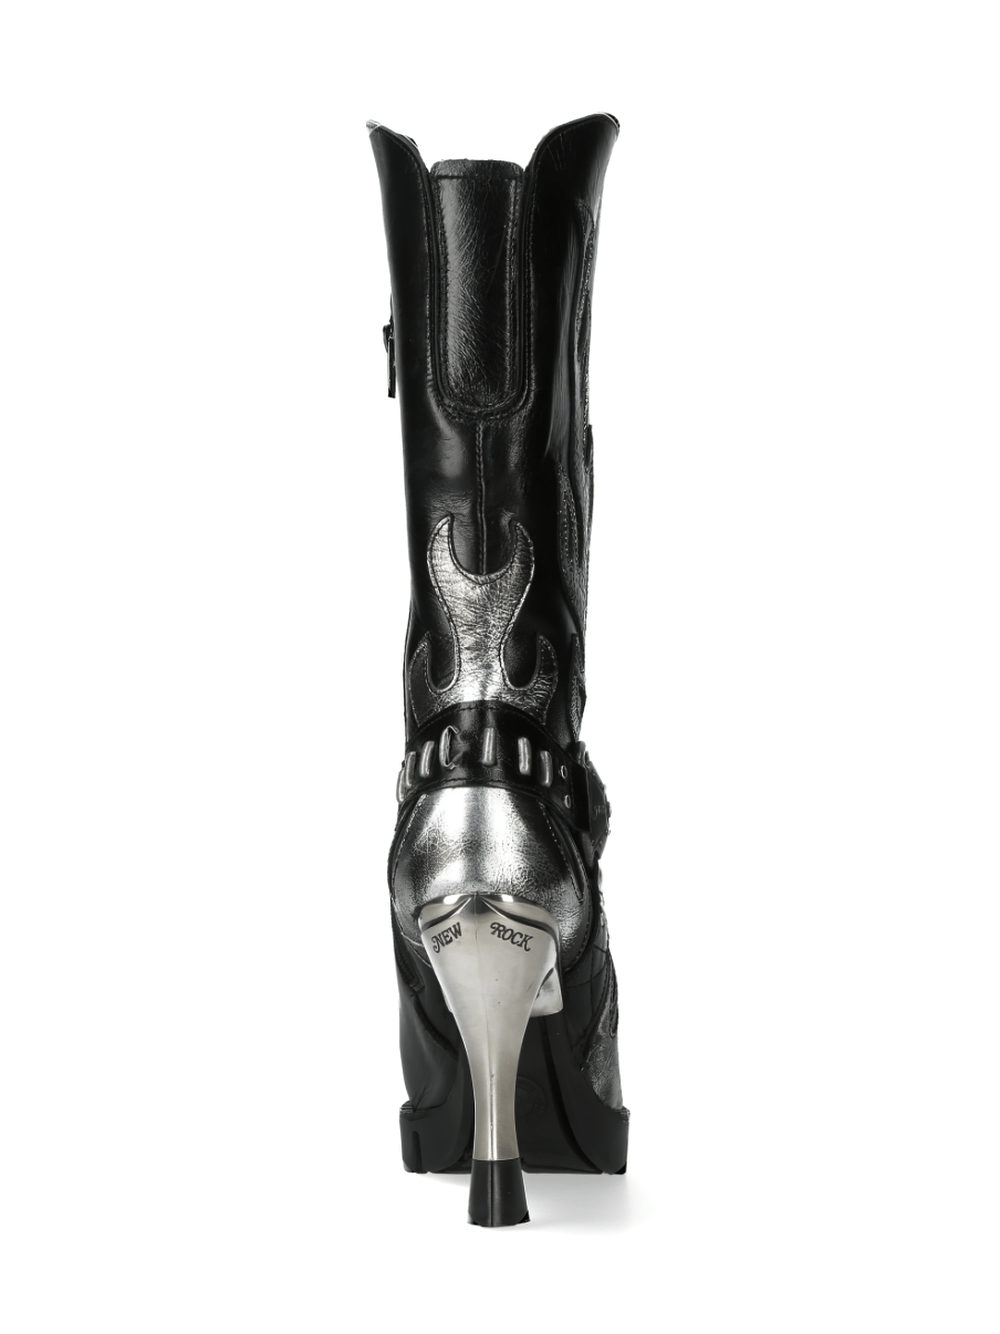 NEW ROCK Gothic Black Boots with Metallic Accents